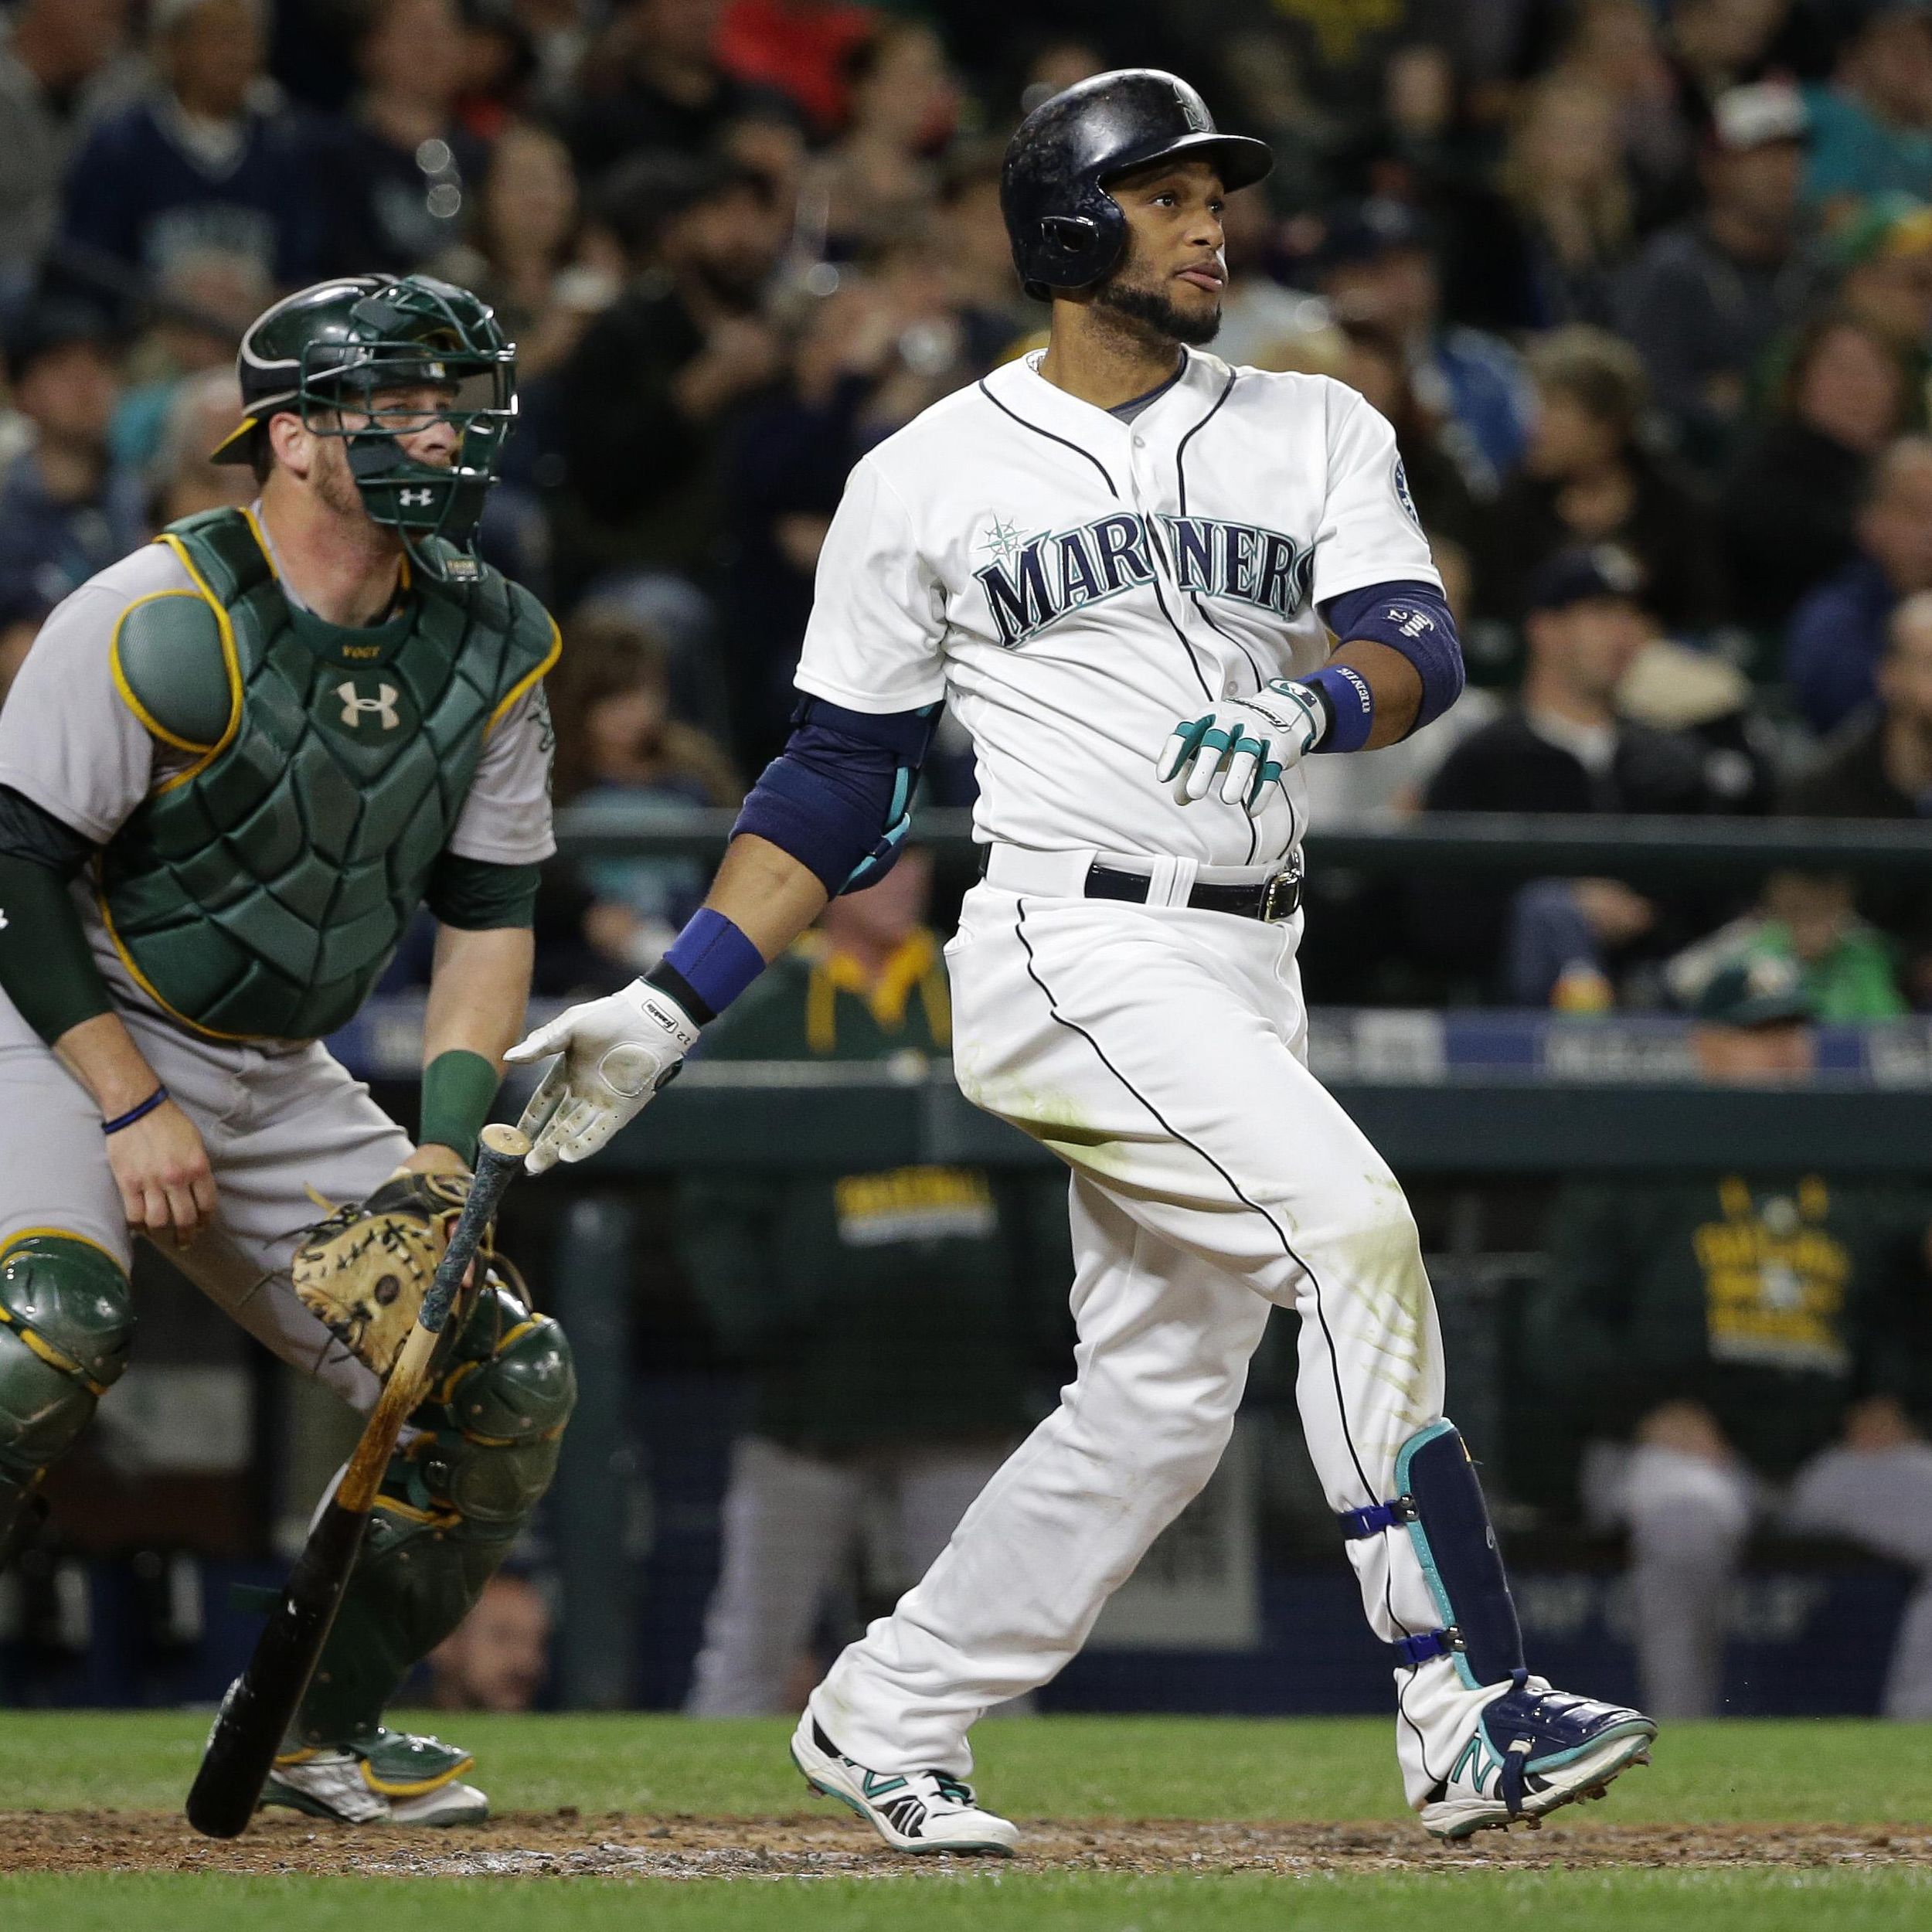 Seattle Mariners infielder Robinson Cano has support of his teammates